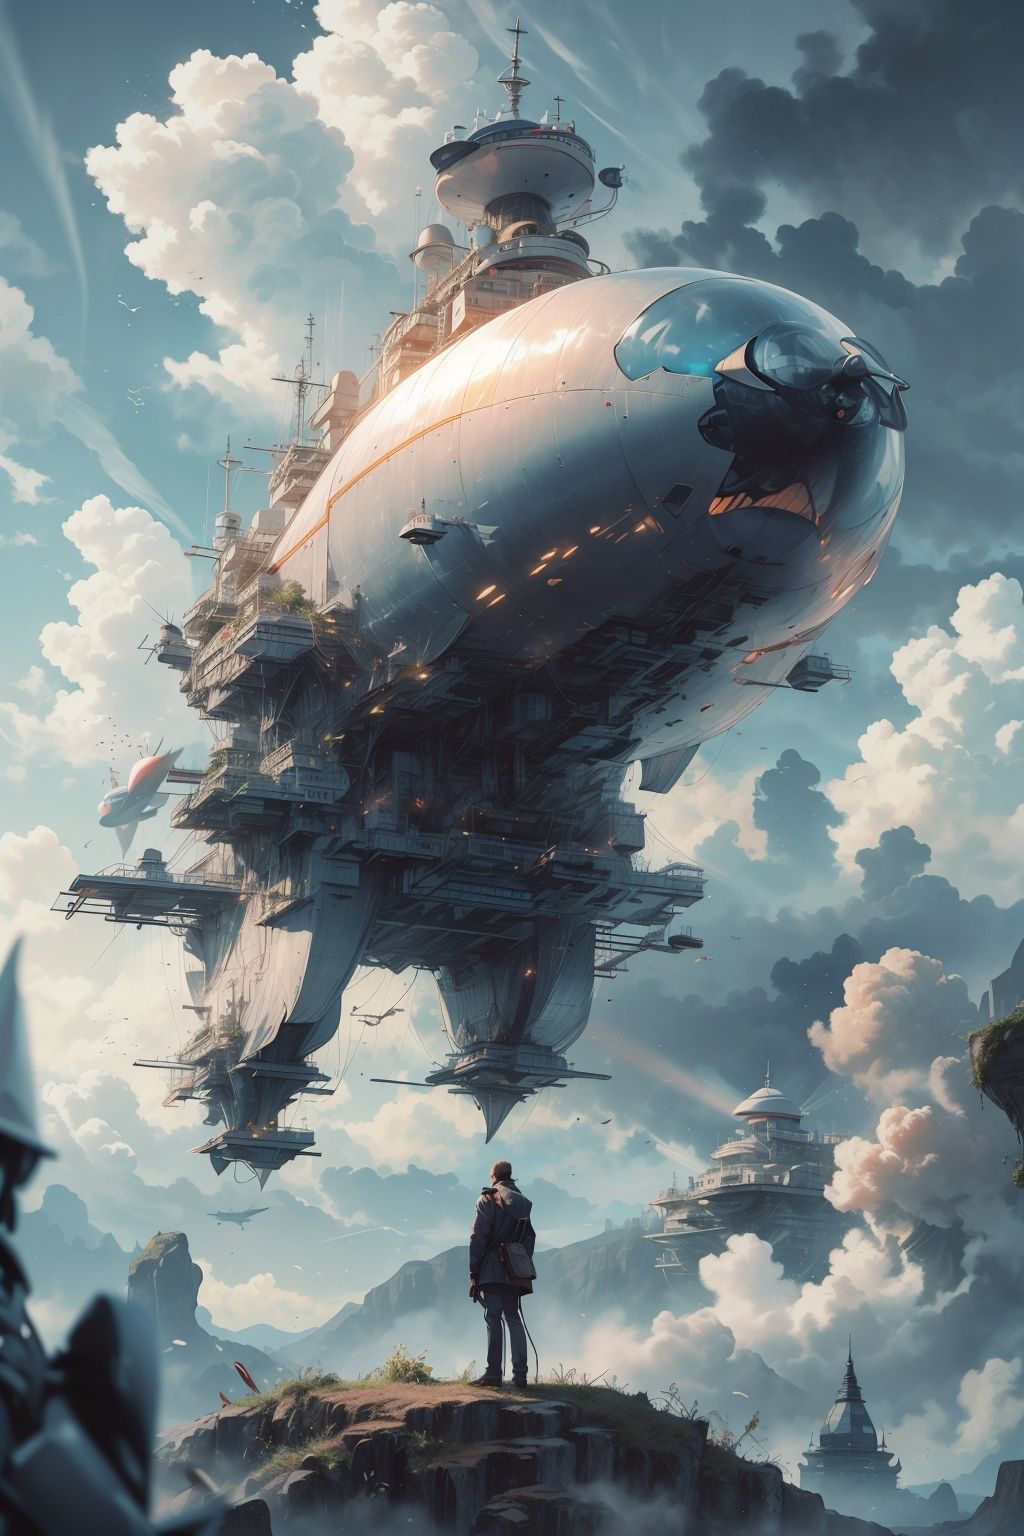 best quality,masterpiec,Megalophobia,giant phobia,Giant aircraft,cloud,sky,A airship inlaid with gemstones,Nautilus,in sky,aircraft,staray,A man looks up on the ground,low angle,Symmetrical composition, <lora:CrystallineAI-000009:0.6> neowrsk <lora:neowrsk_20230617030432-000001:0.8>